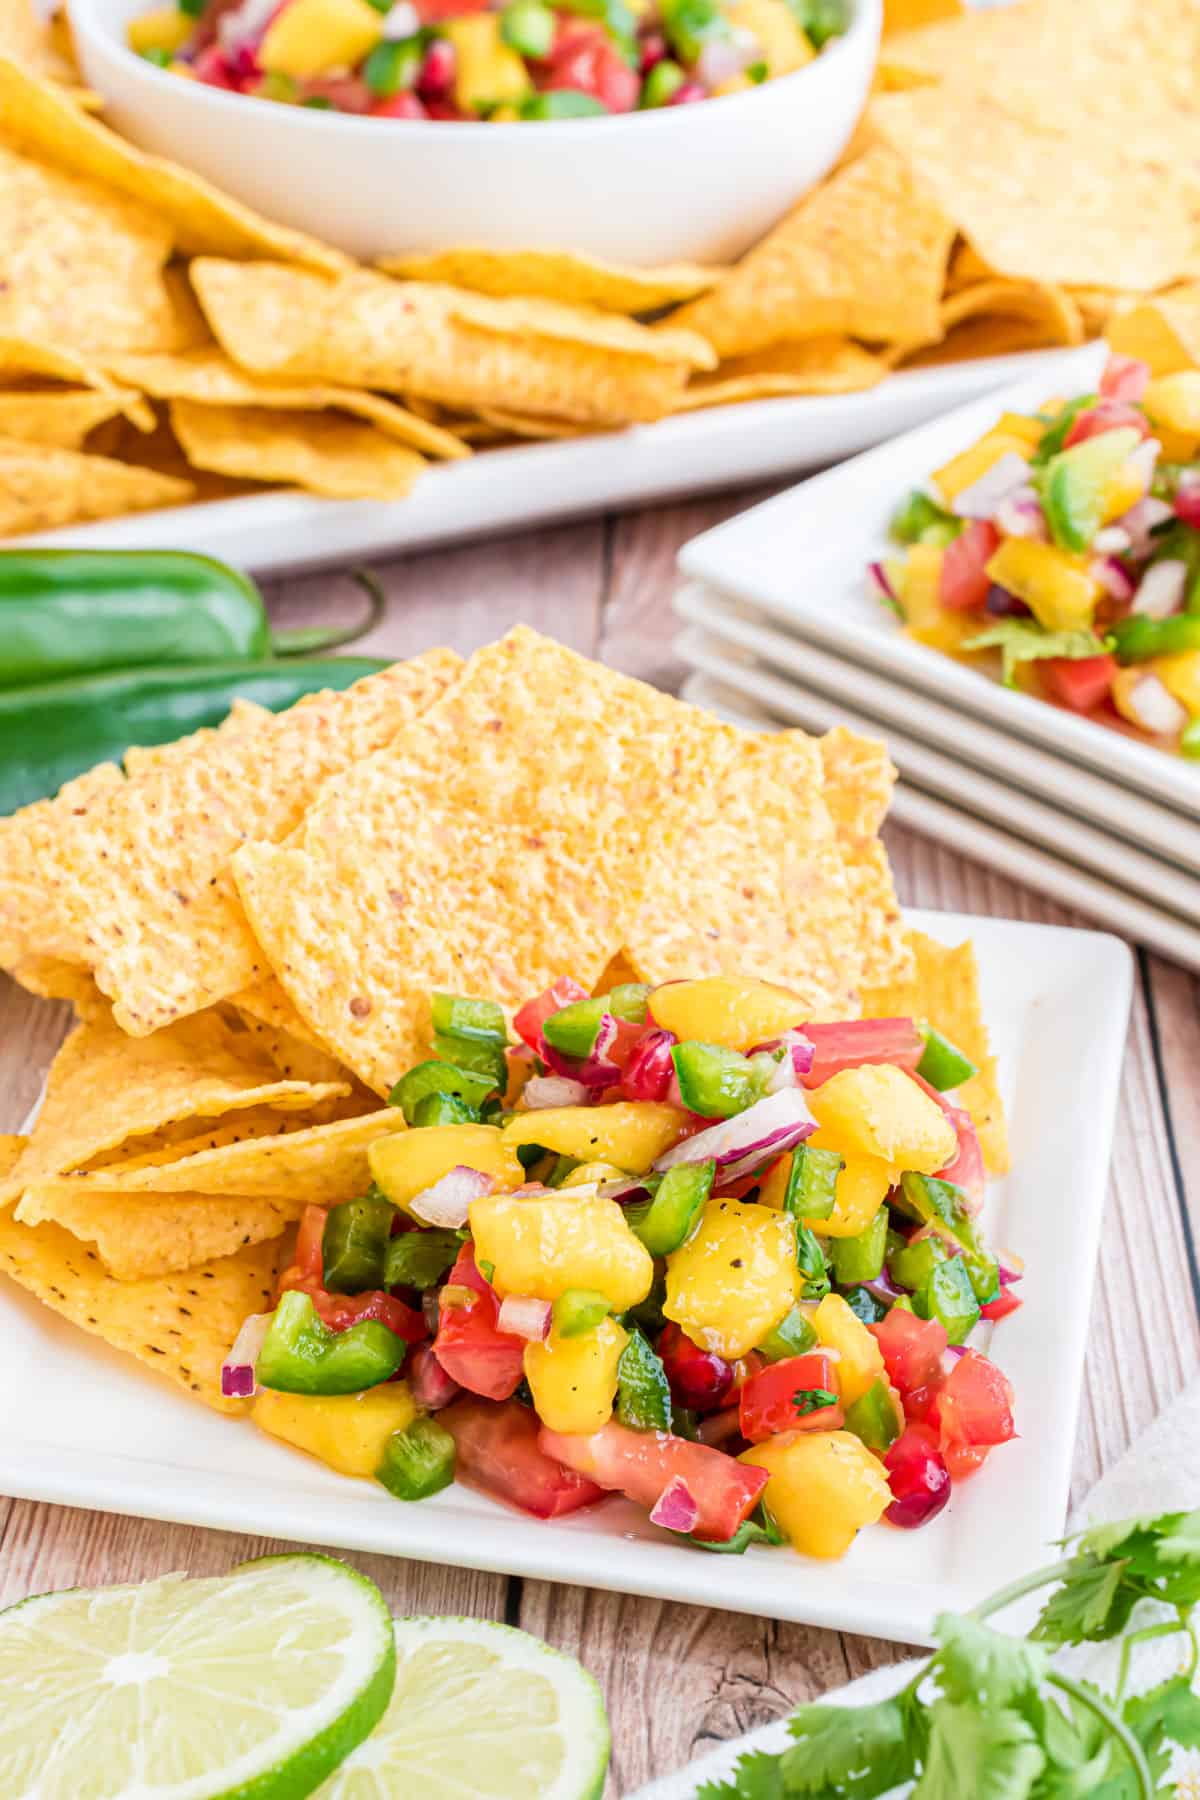 Mango salsa served on a plate with tortilla chips.